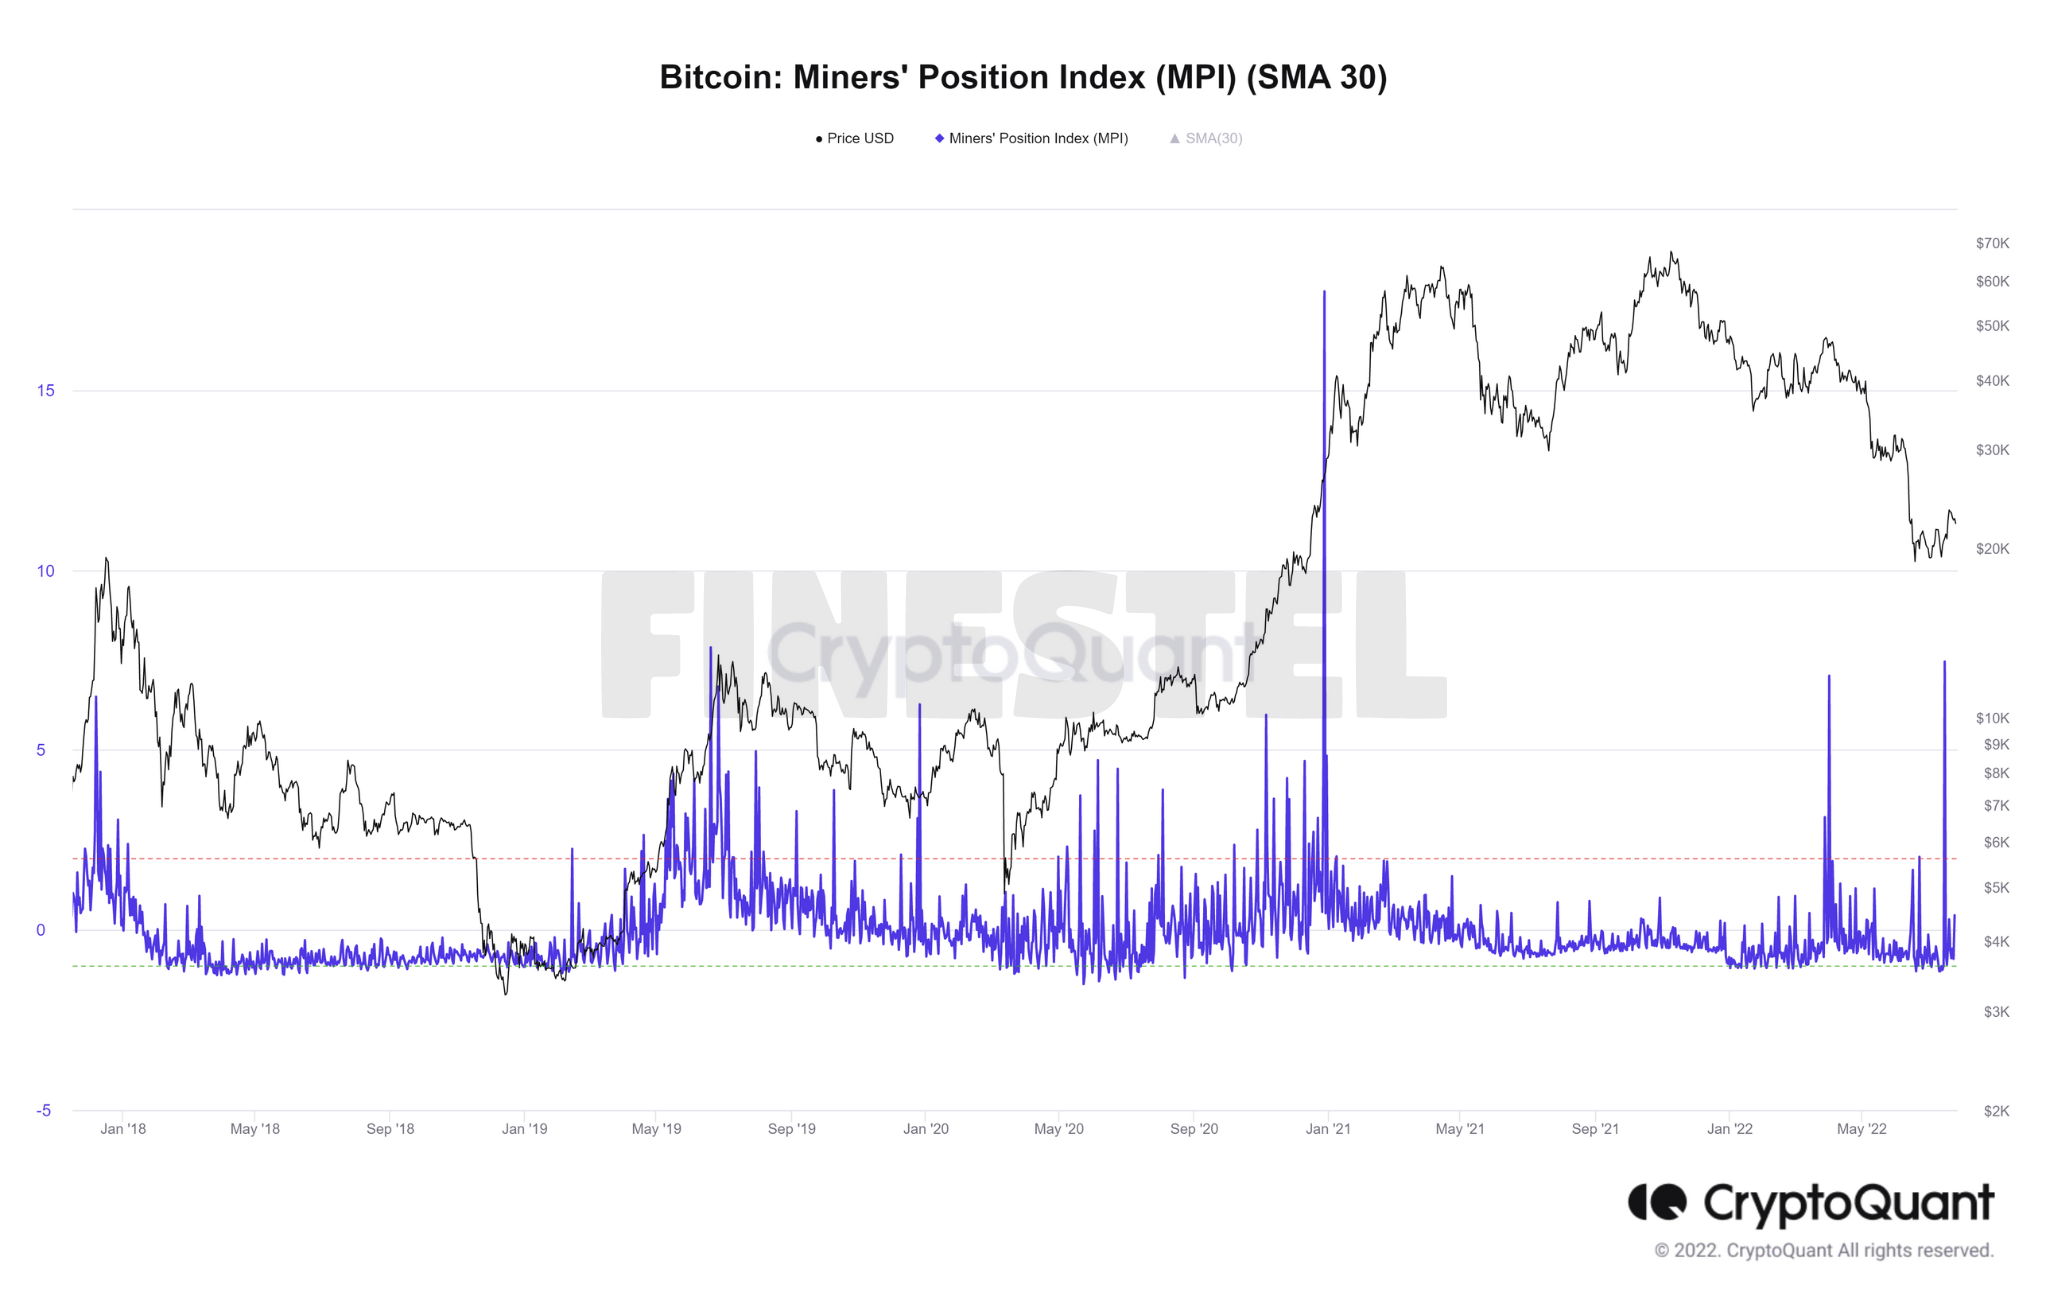 Miners' Position Index (MPI)